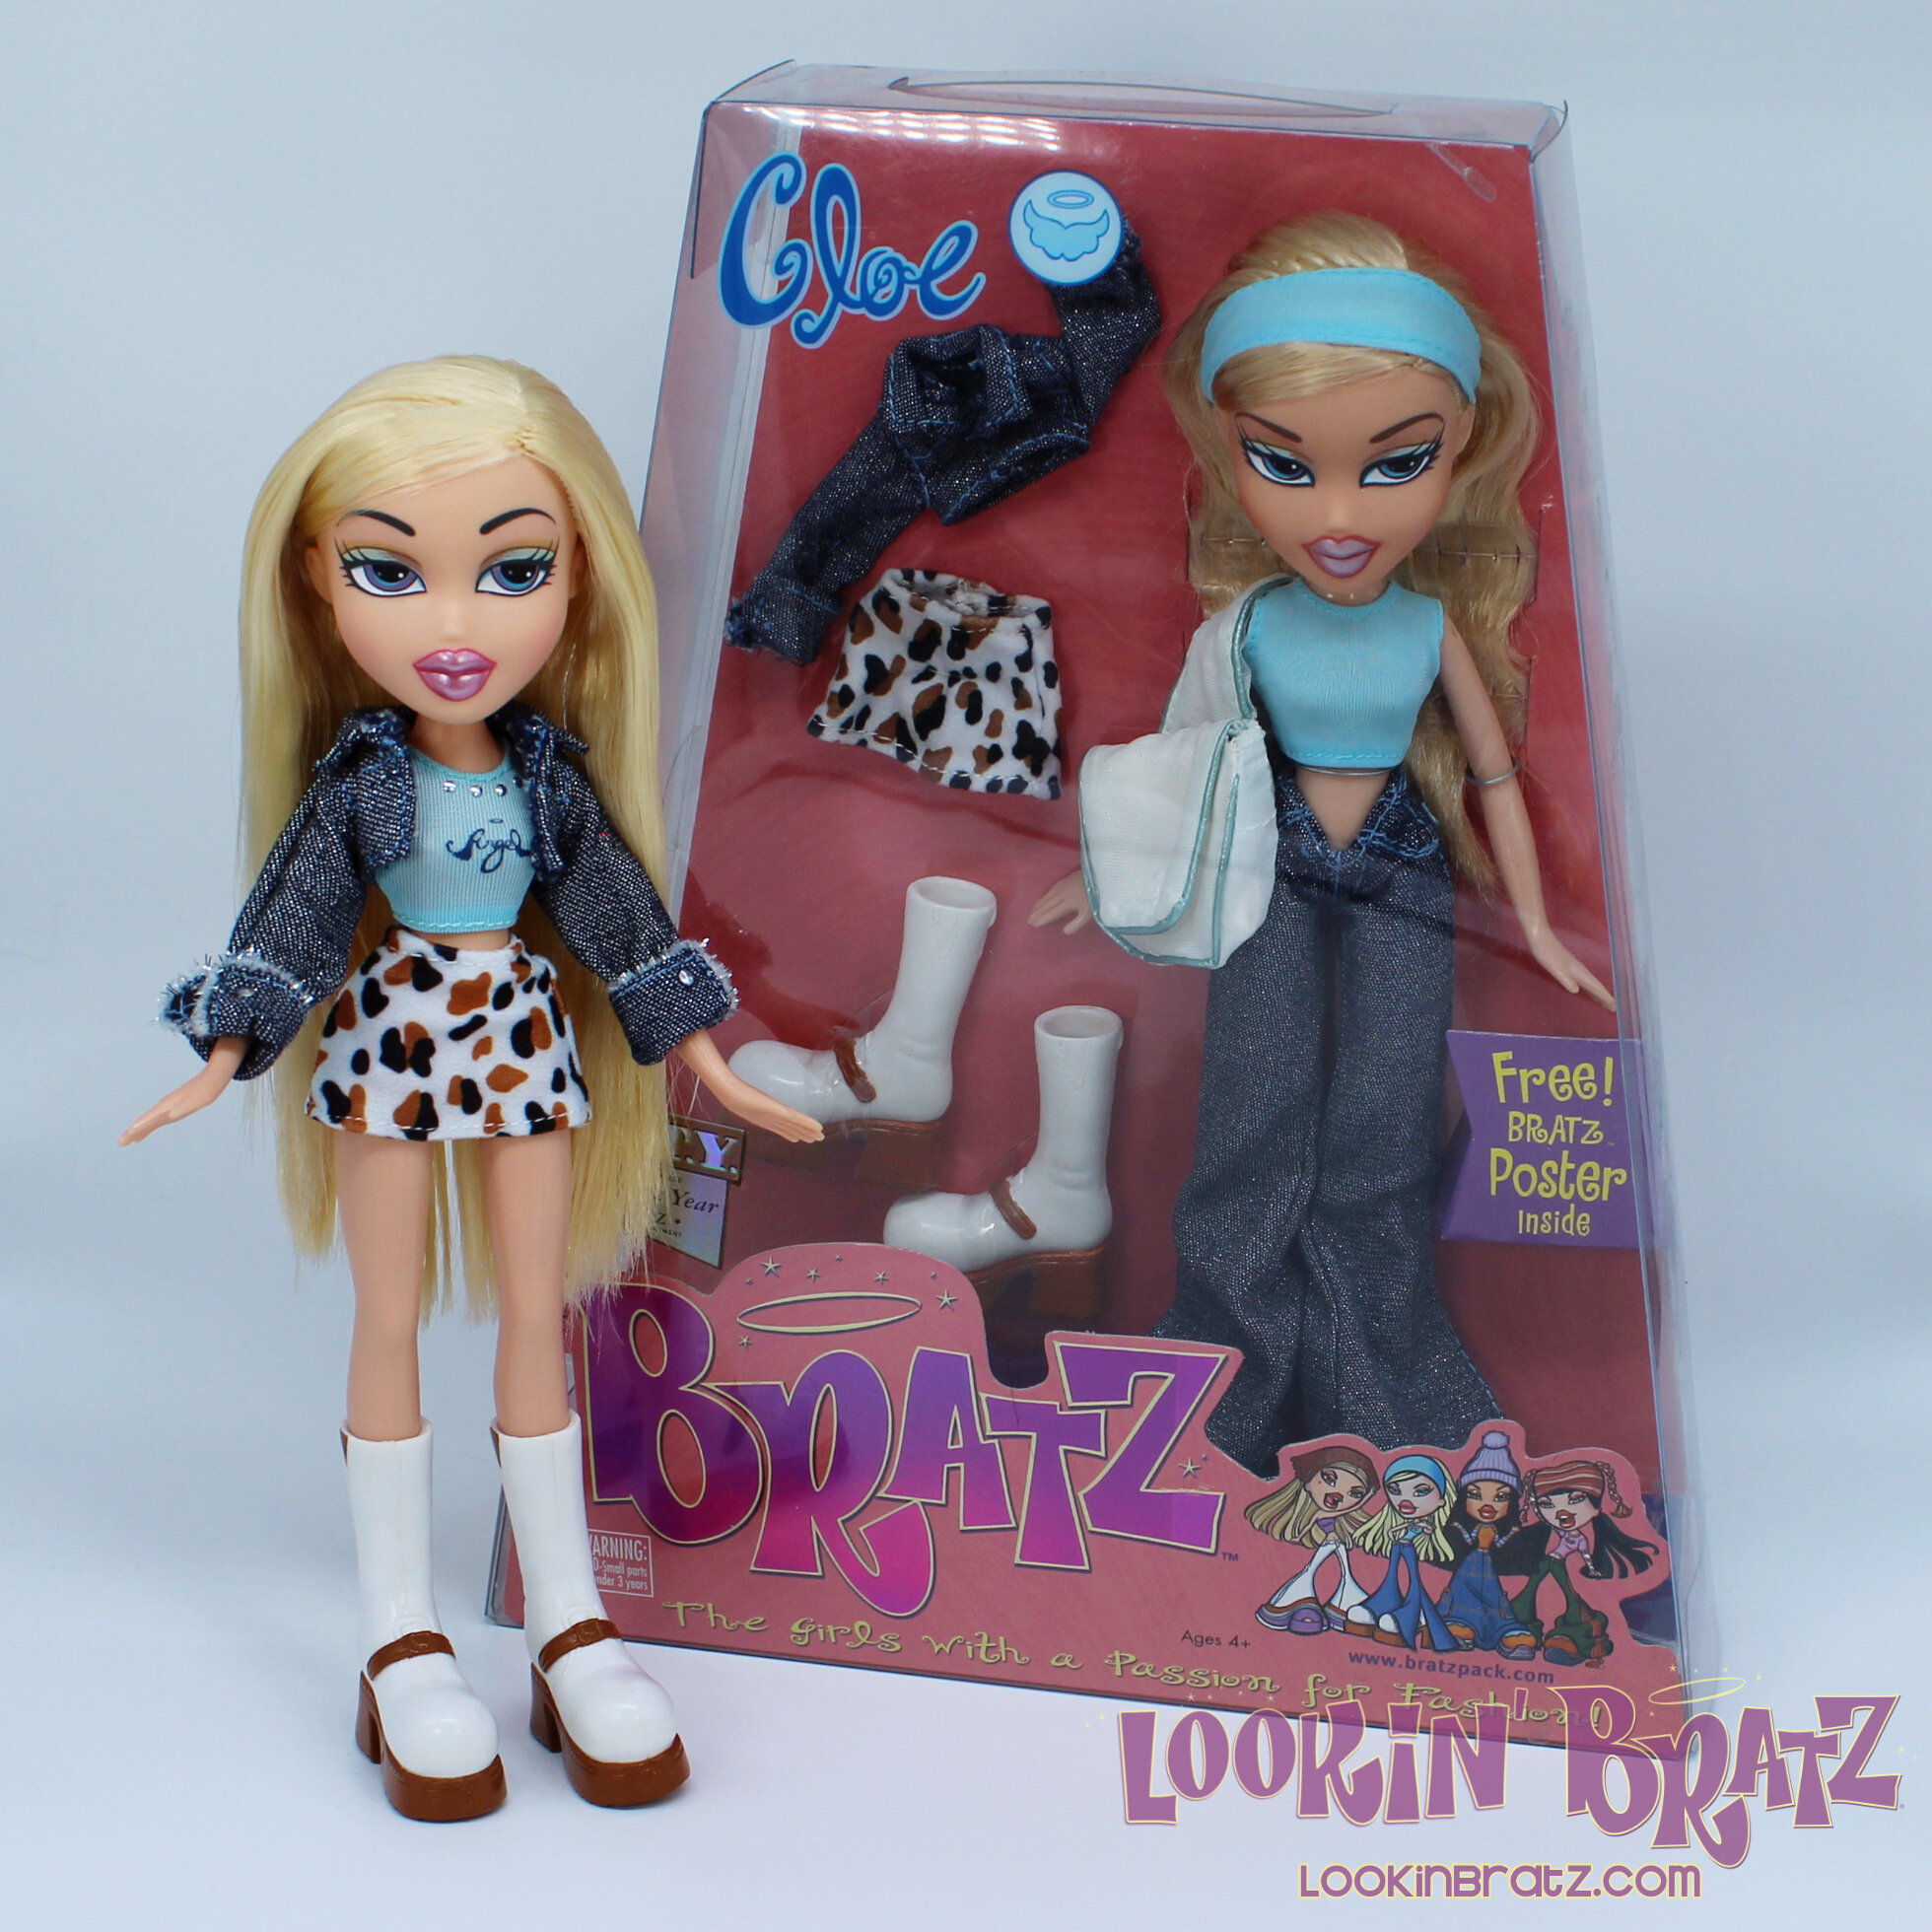 Bratz 20 Yearz Special Edition Cloe (2021; unboxed) and Bratz First Edition Re-Release Cloe (2005; boxed)